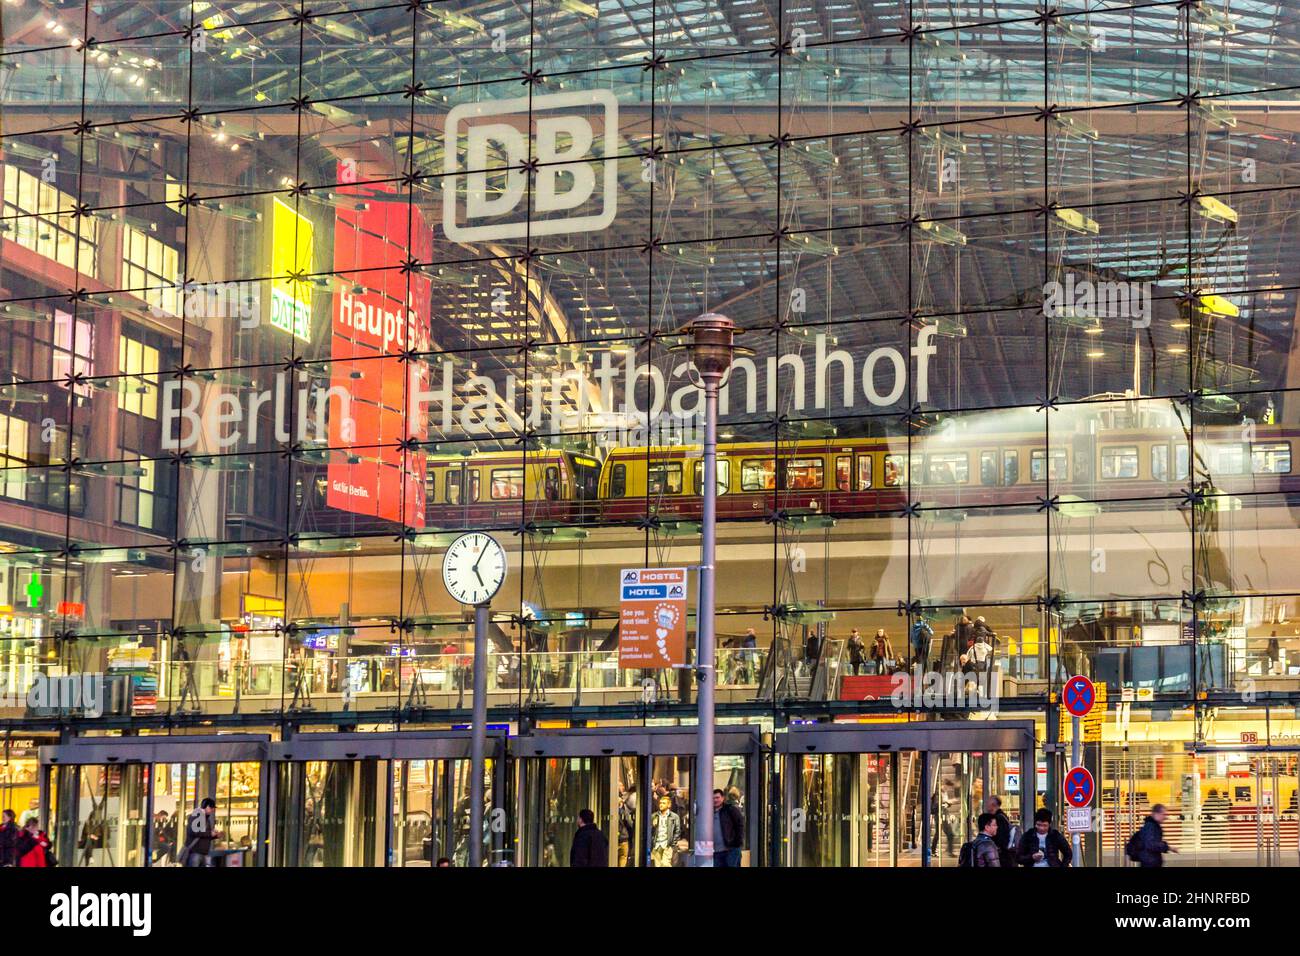 Berlin main station frontview in Berlin by night Stock Photo